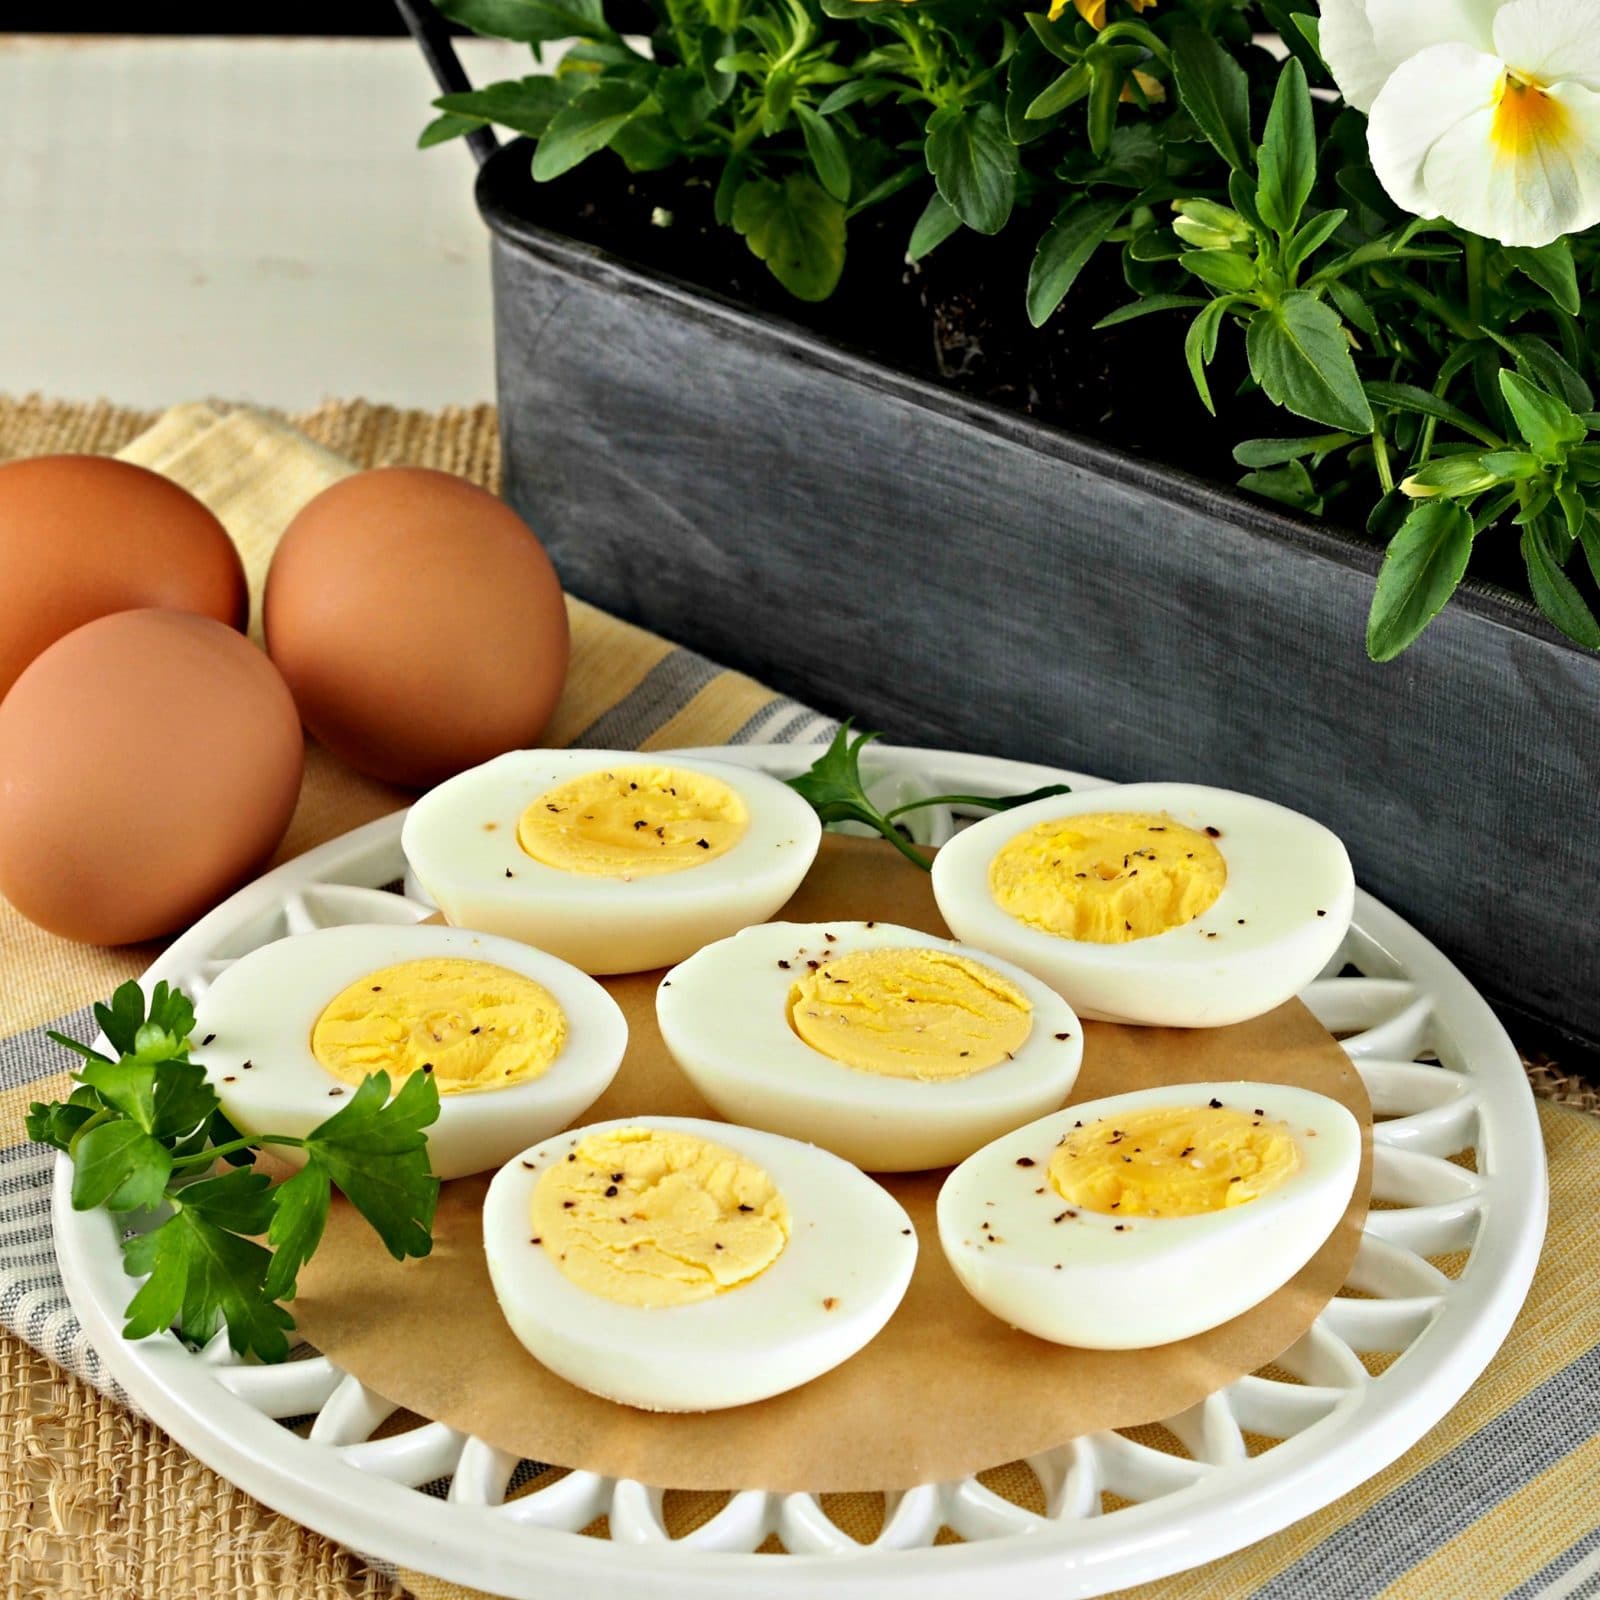 Hard-Cooked Steamed Eggs. Steaming eggs instead of boiling them creates eggs with yellow yolks, perfect whites & eggs easier to peel. Egg perfection. Simply Sated